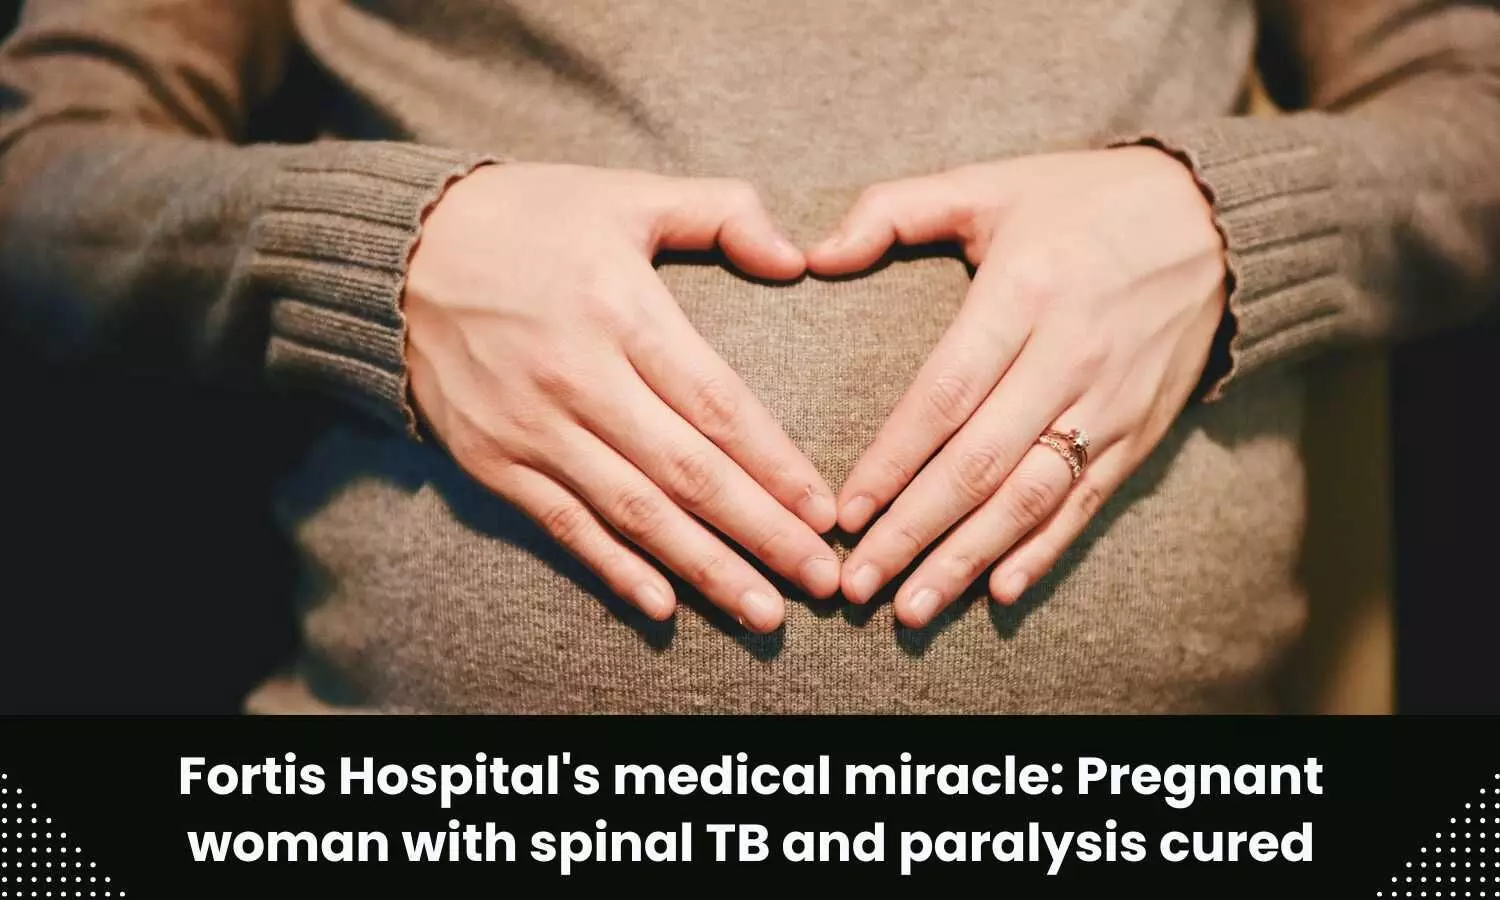 Pregnant woman suffering from Spinal TB, Paralysis treated at Fortis Hospital